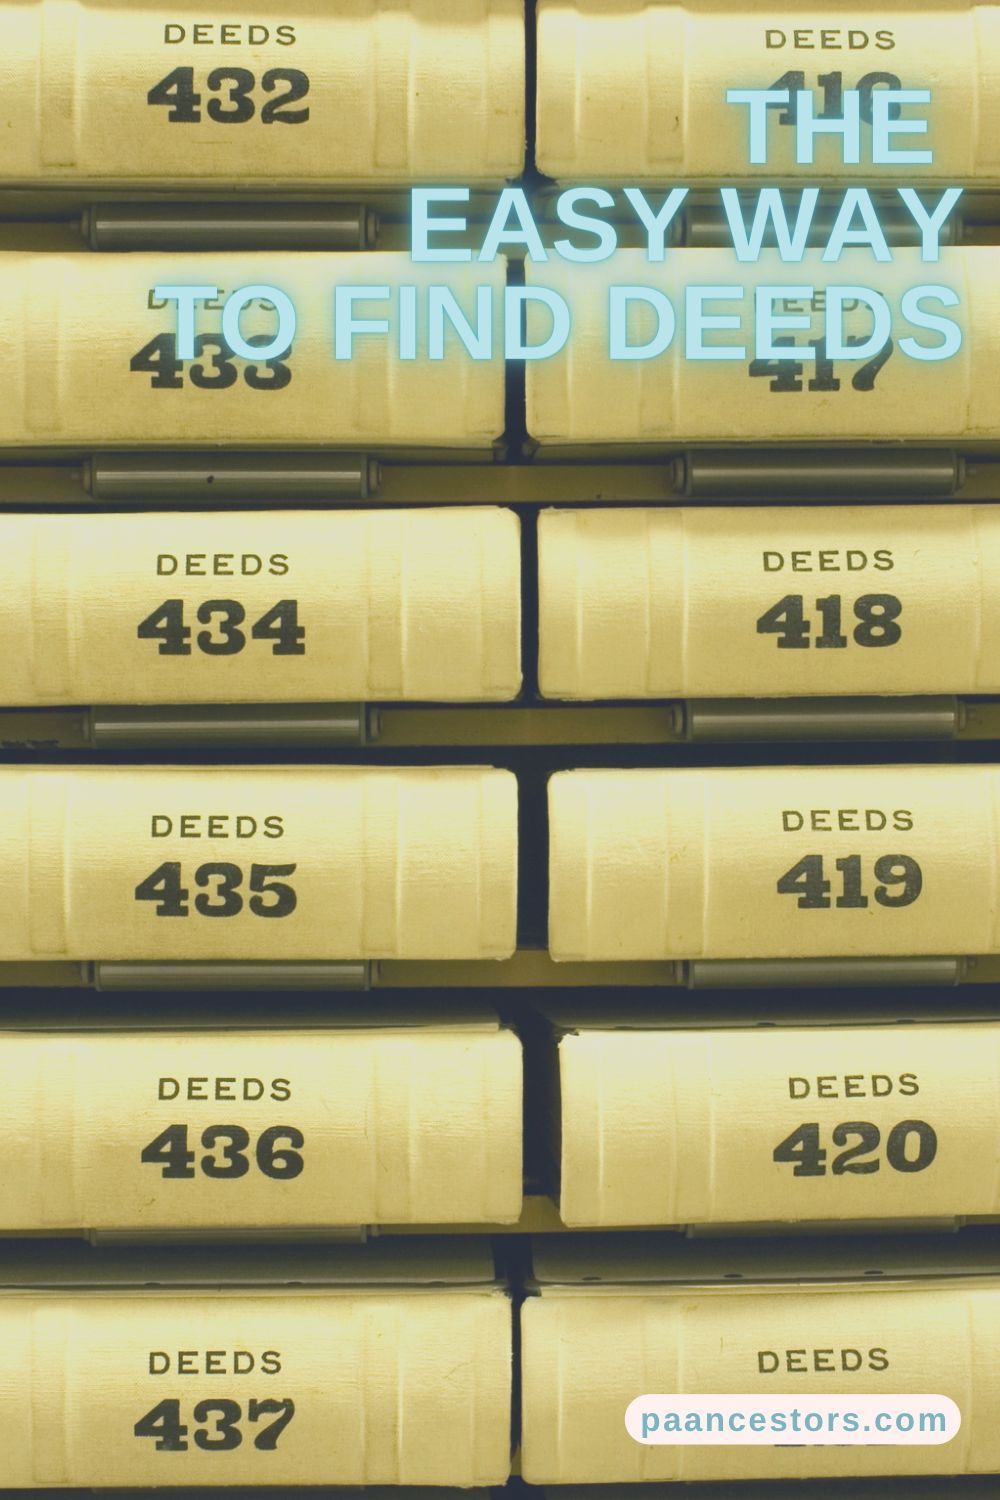 The Easy Way to Find Deeds in PA